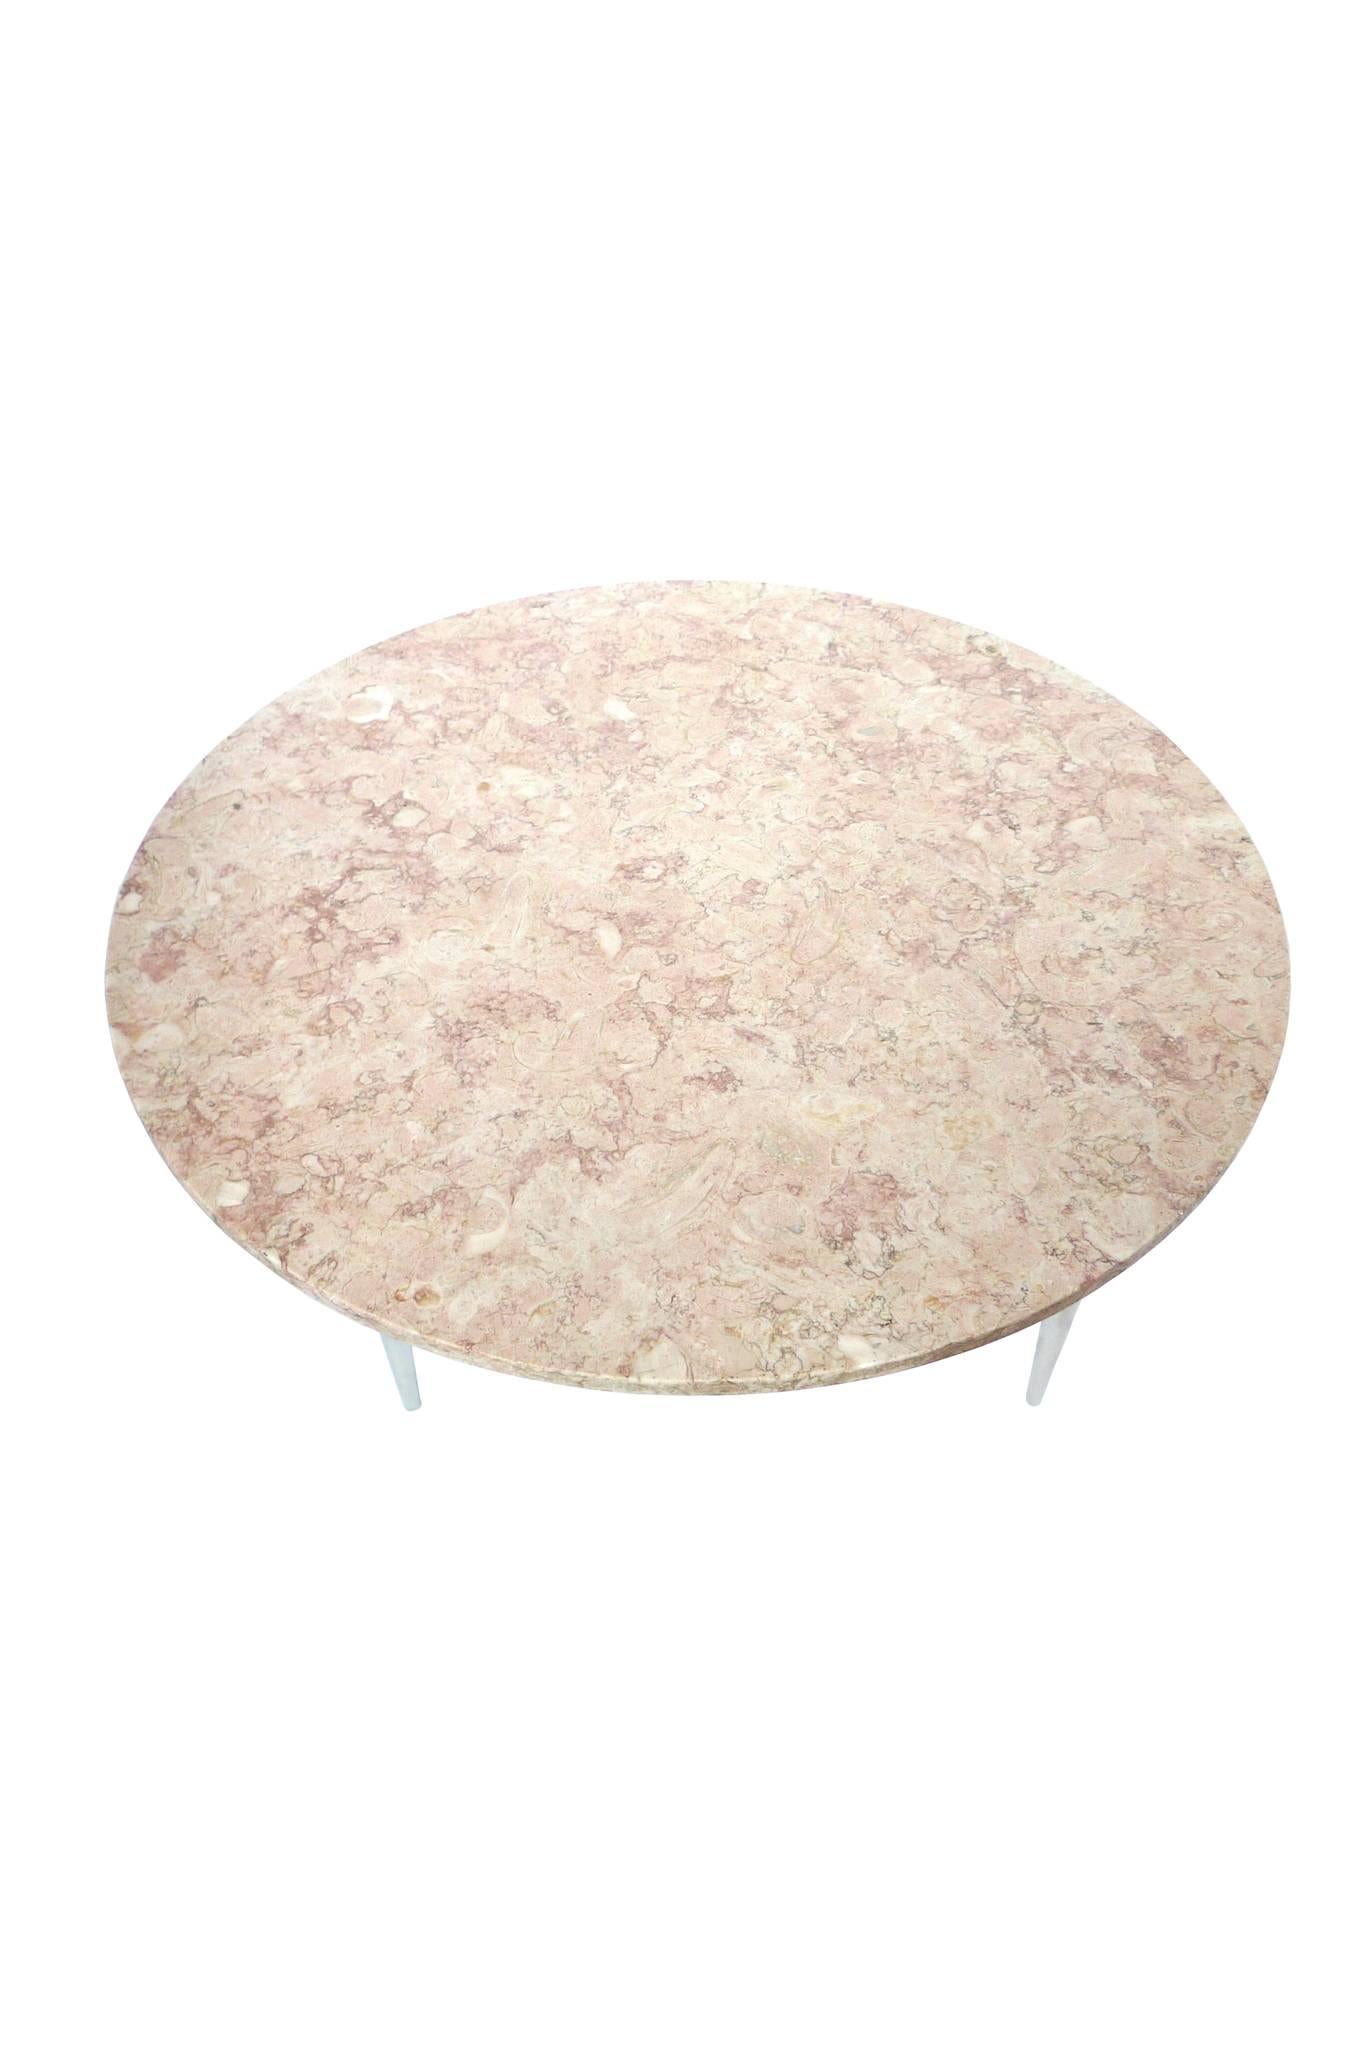 This round cocktail table is an Heirloom Quality Weiman table. Its top is travertine with a beautiful rosy pattern verging on the floral. The base is a wood with newly chromed legs that taper downward. It's a striking piece that will anchor your